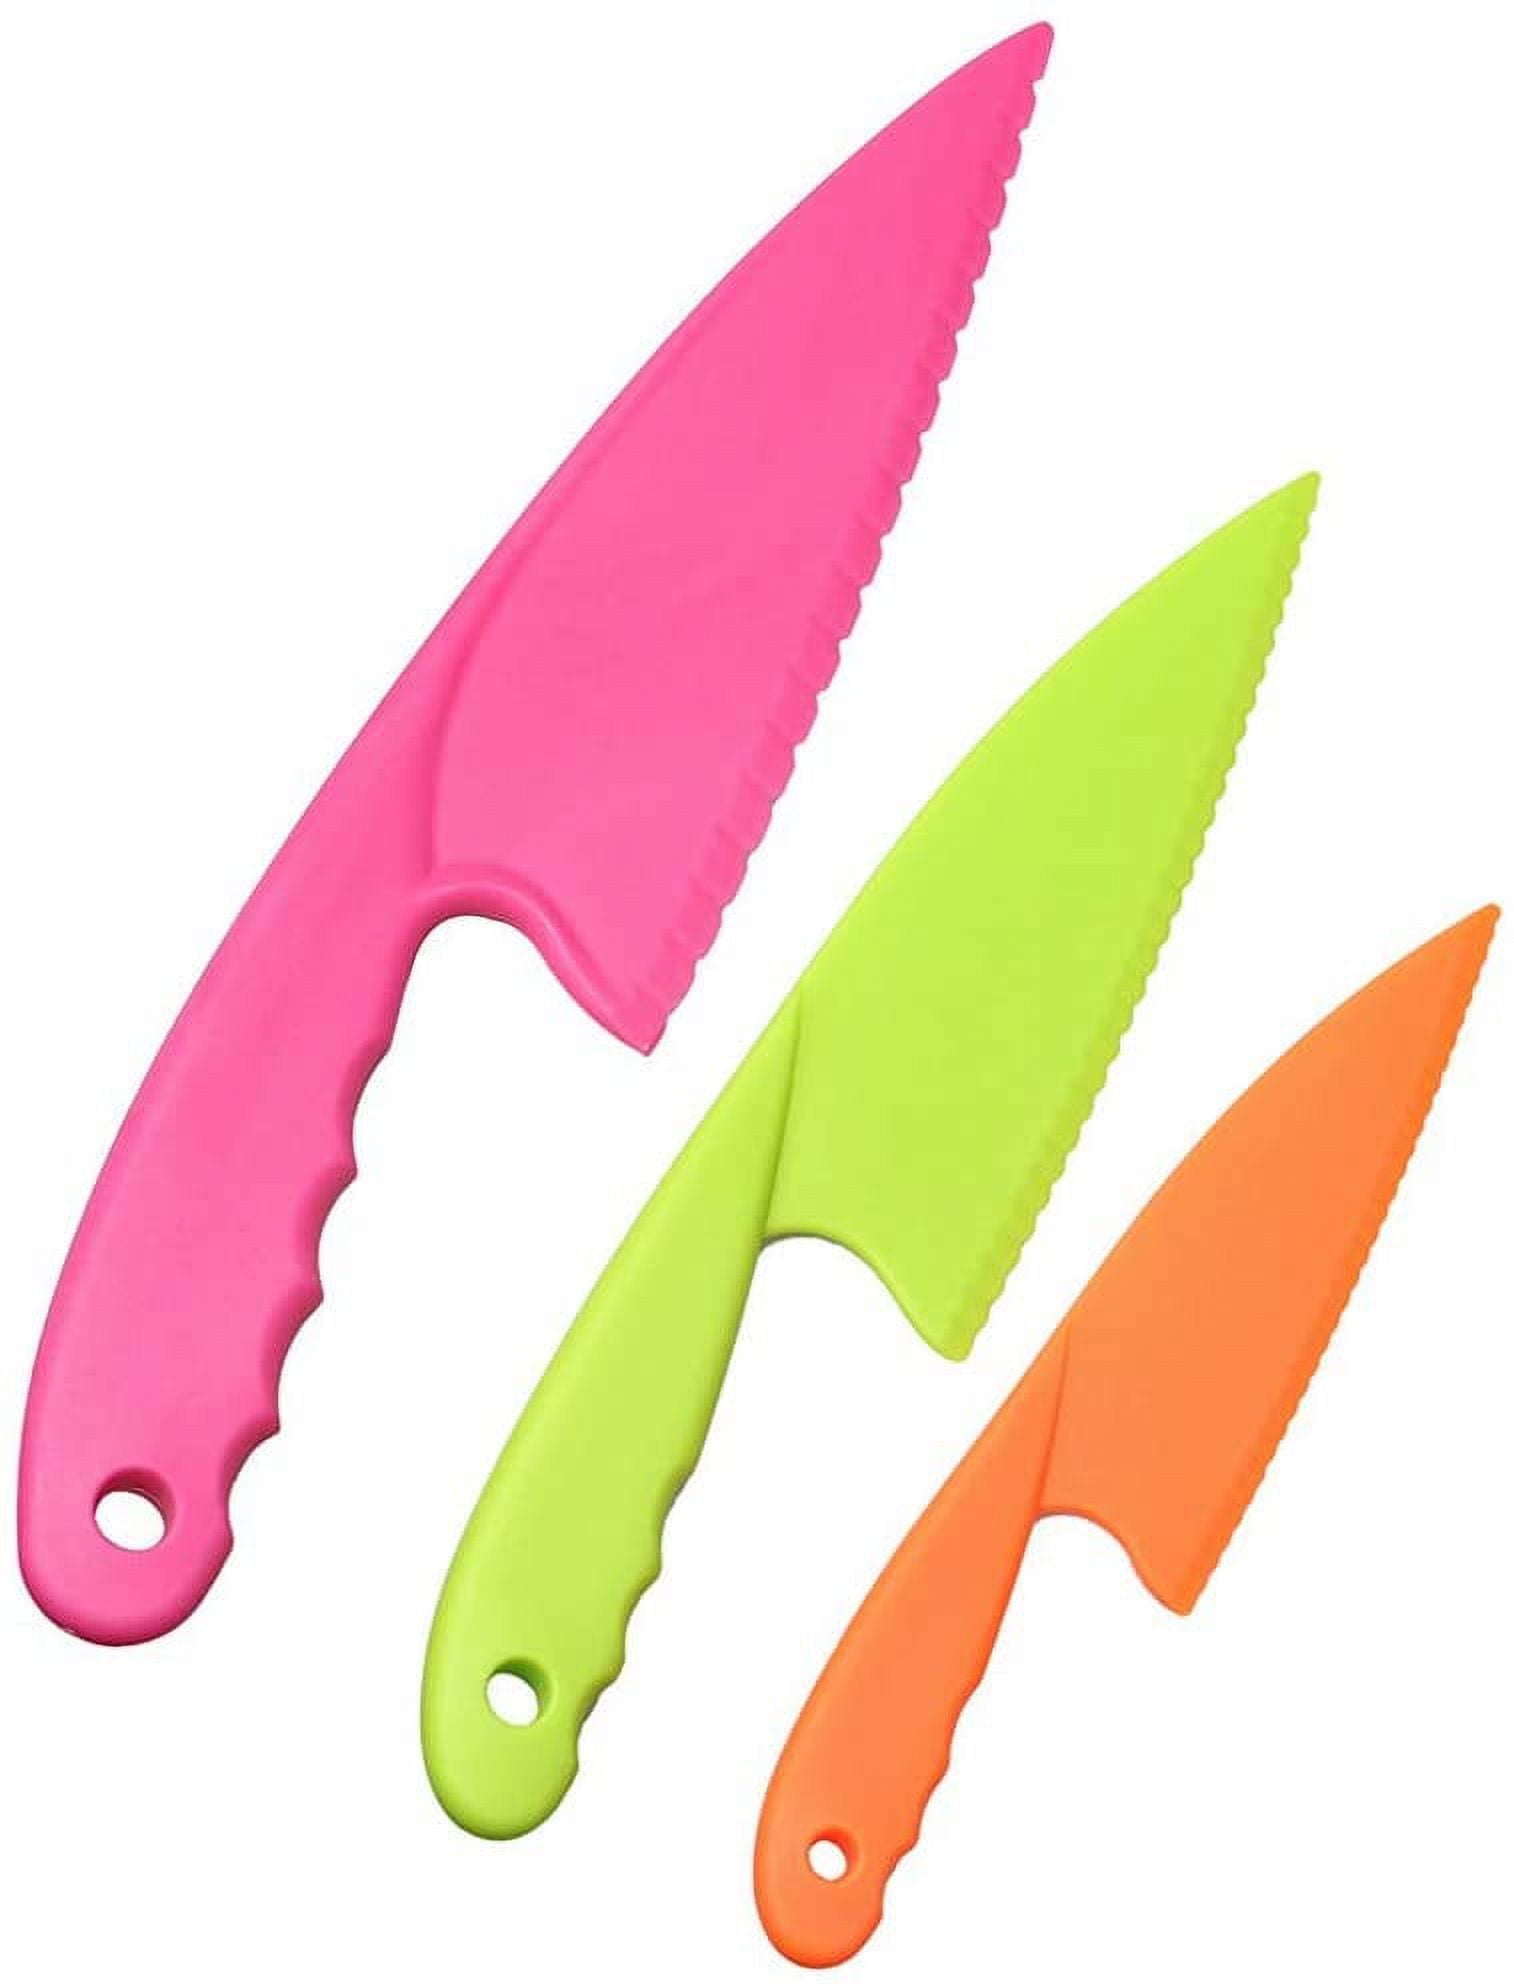 Mimi Nylon Kitchen Knife Set 3 Pieces Bundle with Joie Fruit and Vegetable  Wavy Chopper Knife, Stainless Steel Blade, Colors Vary